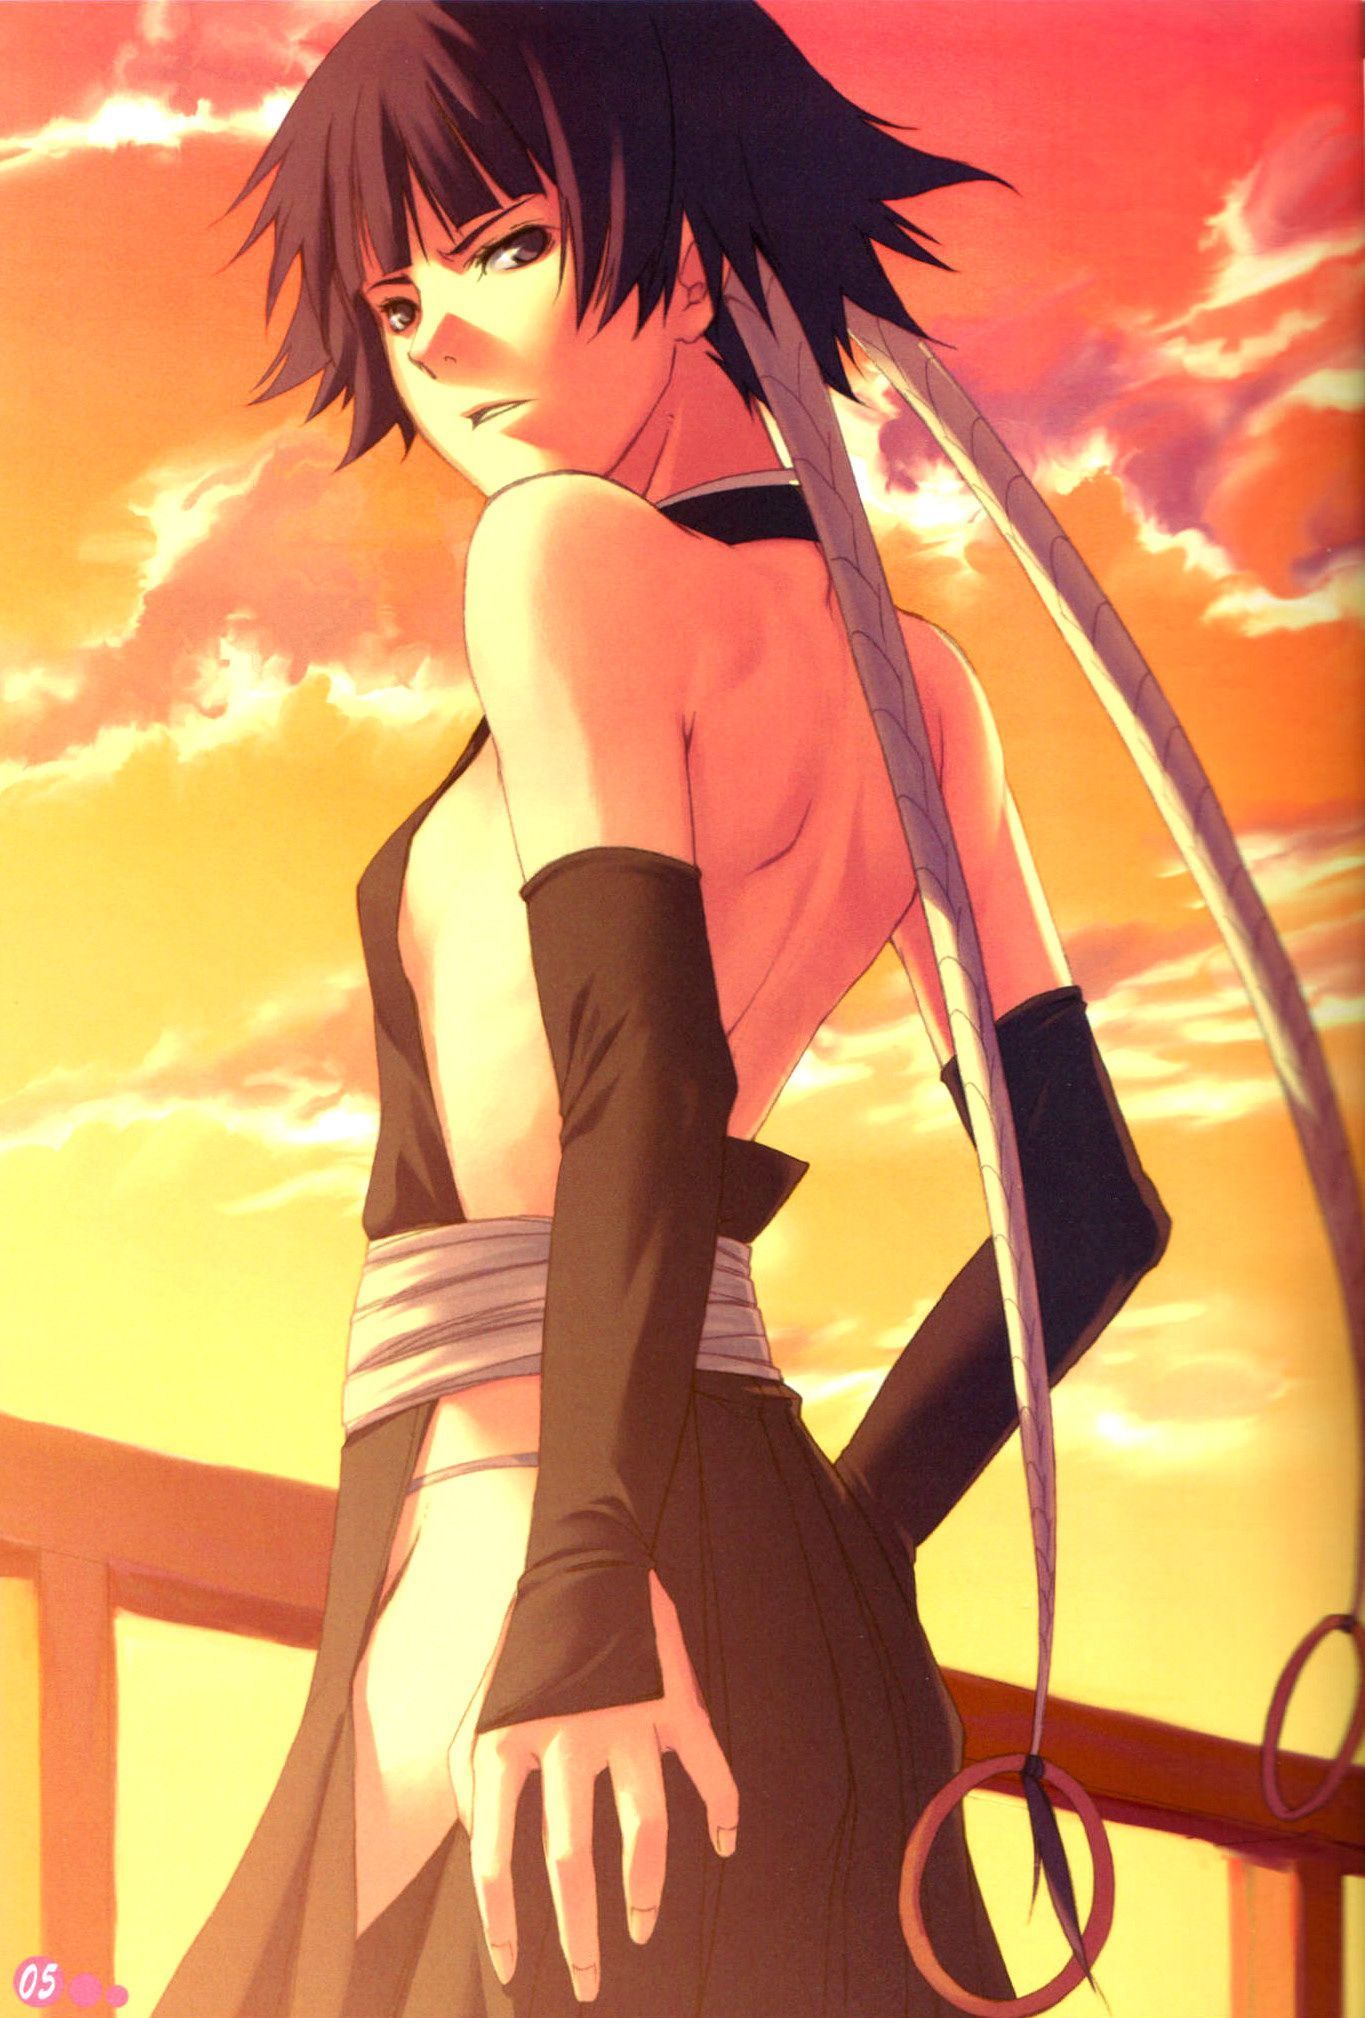 Soi Fon was the former head the Oniwabanshu, taking over after